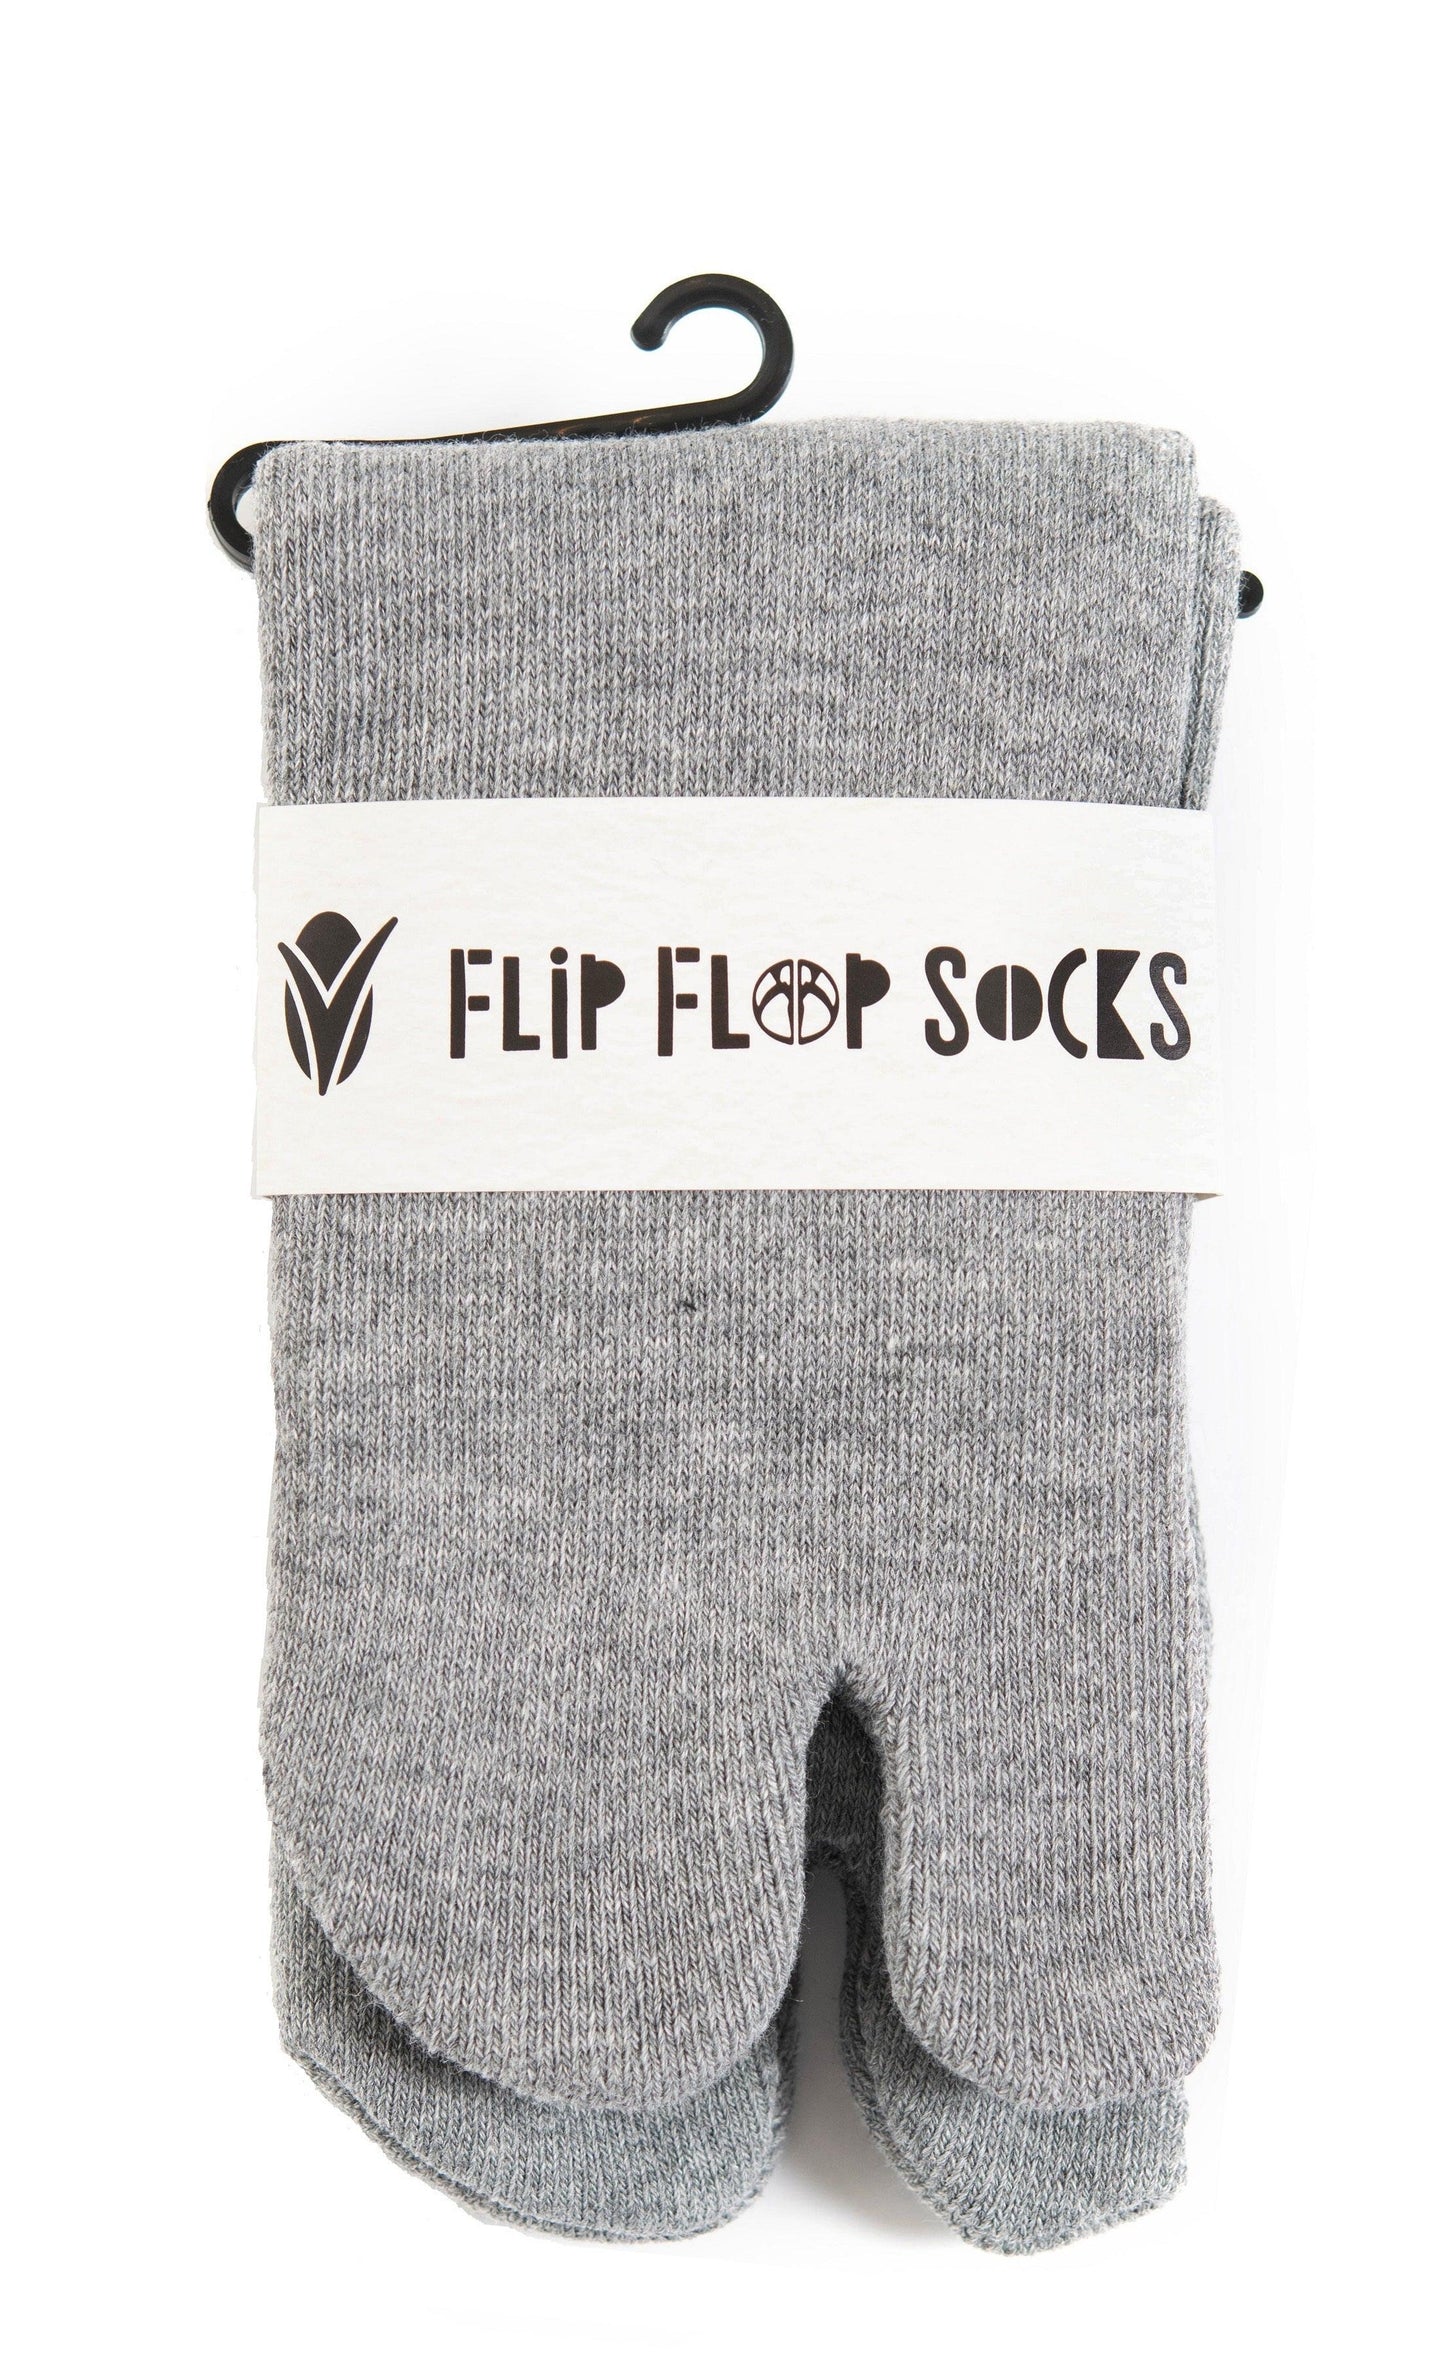 Thicker V-Toe Athletic or Casual Grey Flip-Flop Tabi Socks Cotton Blend Comfortable Stylish - Ankle Socks by V-Toe Socks, Inc - The Hammer Sports